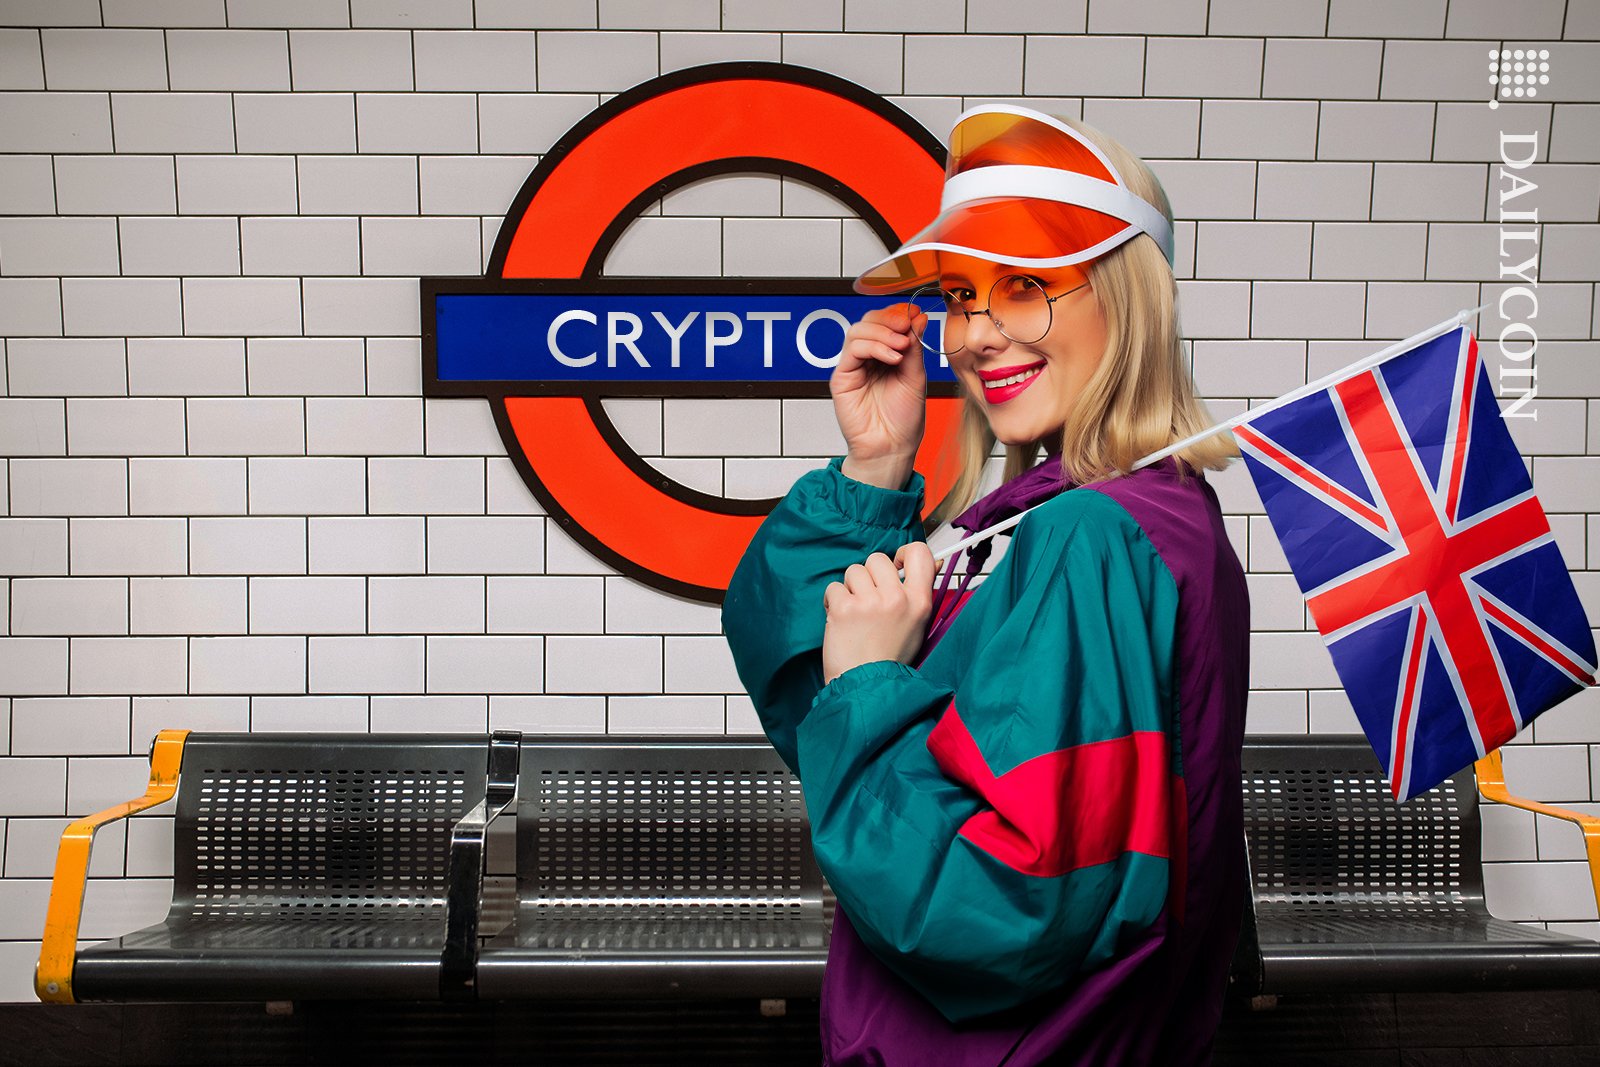 Girl in London on the Crypto st. underground station.